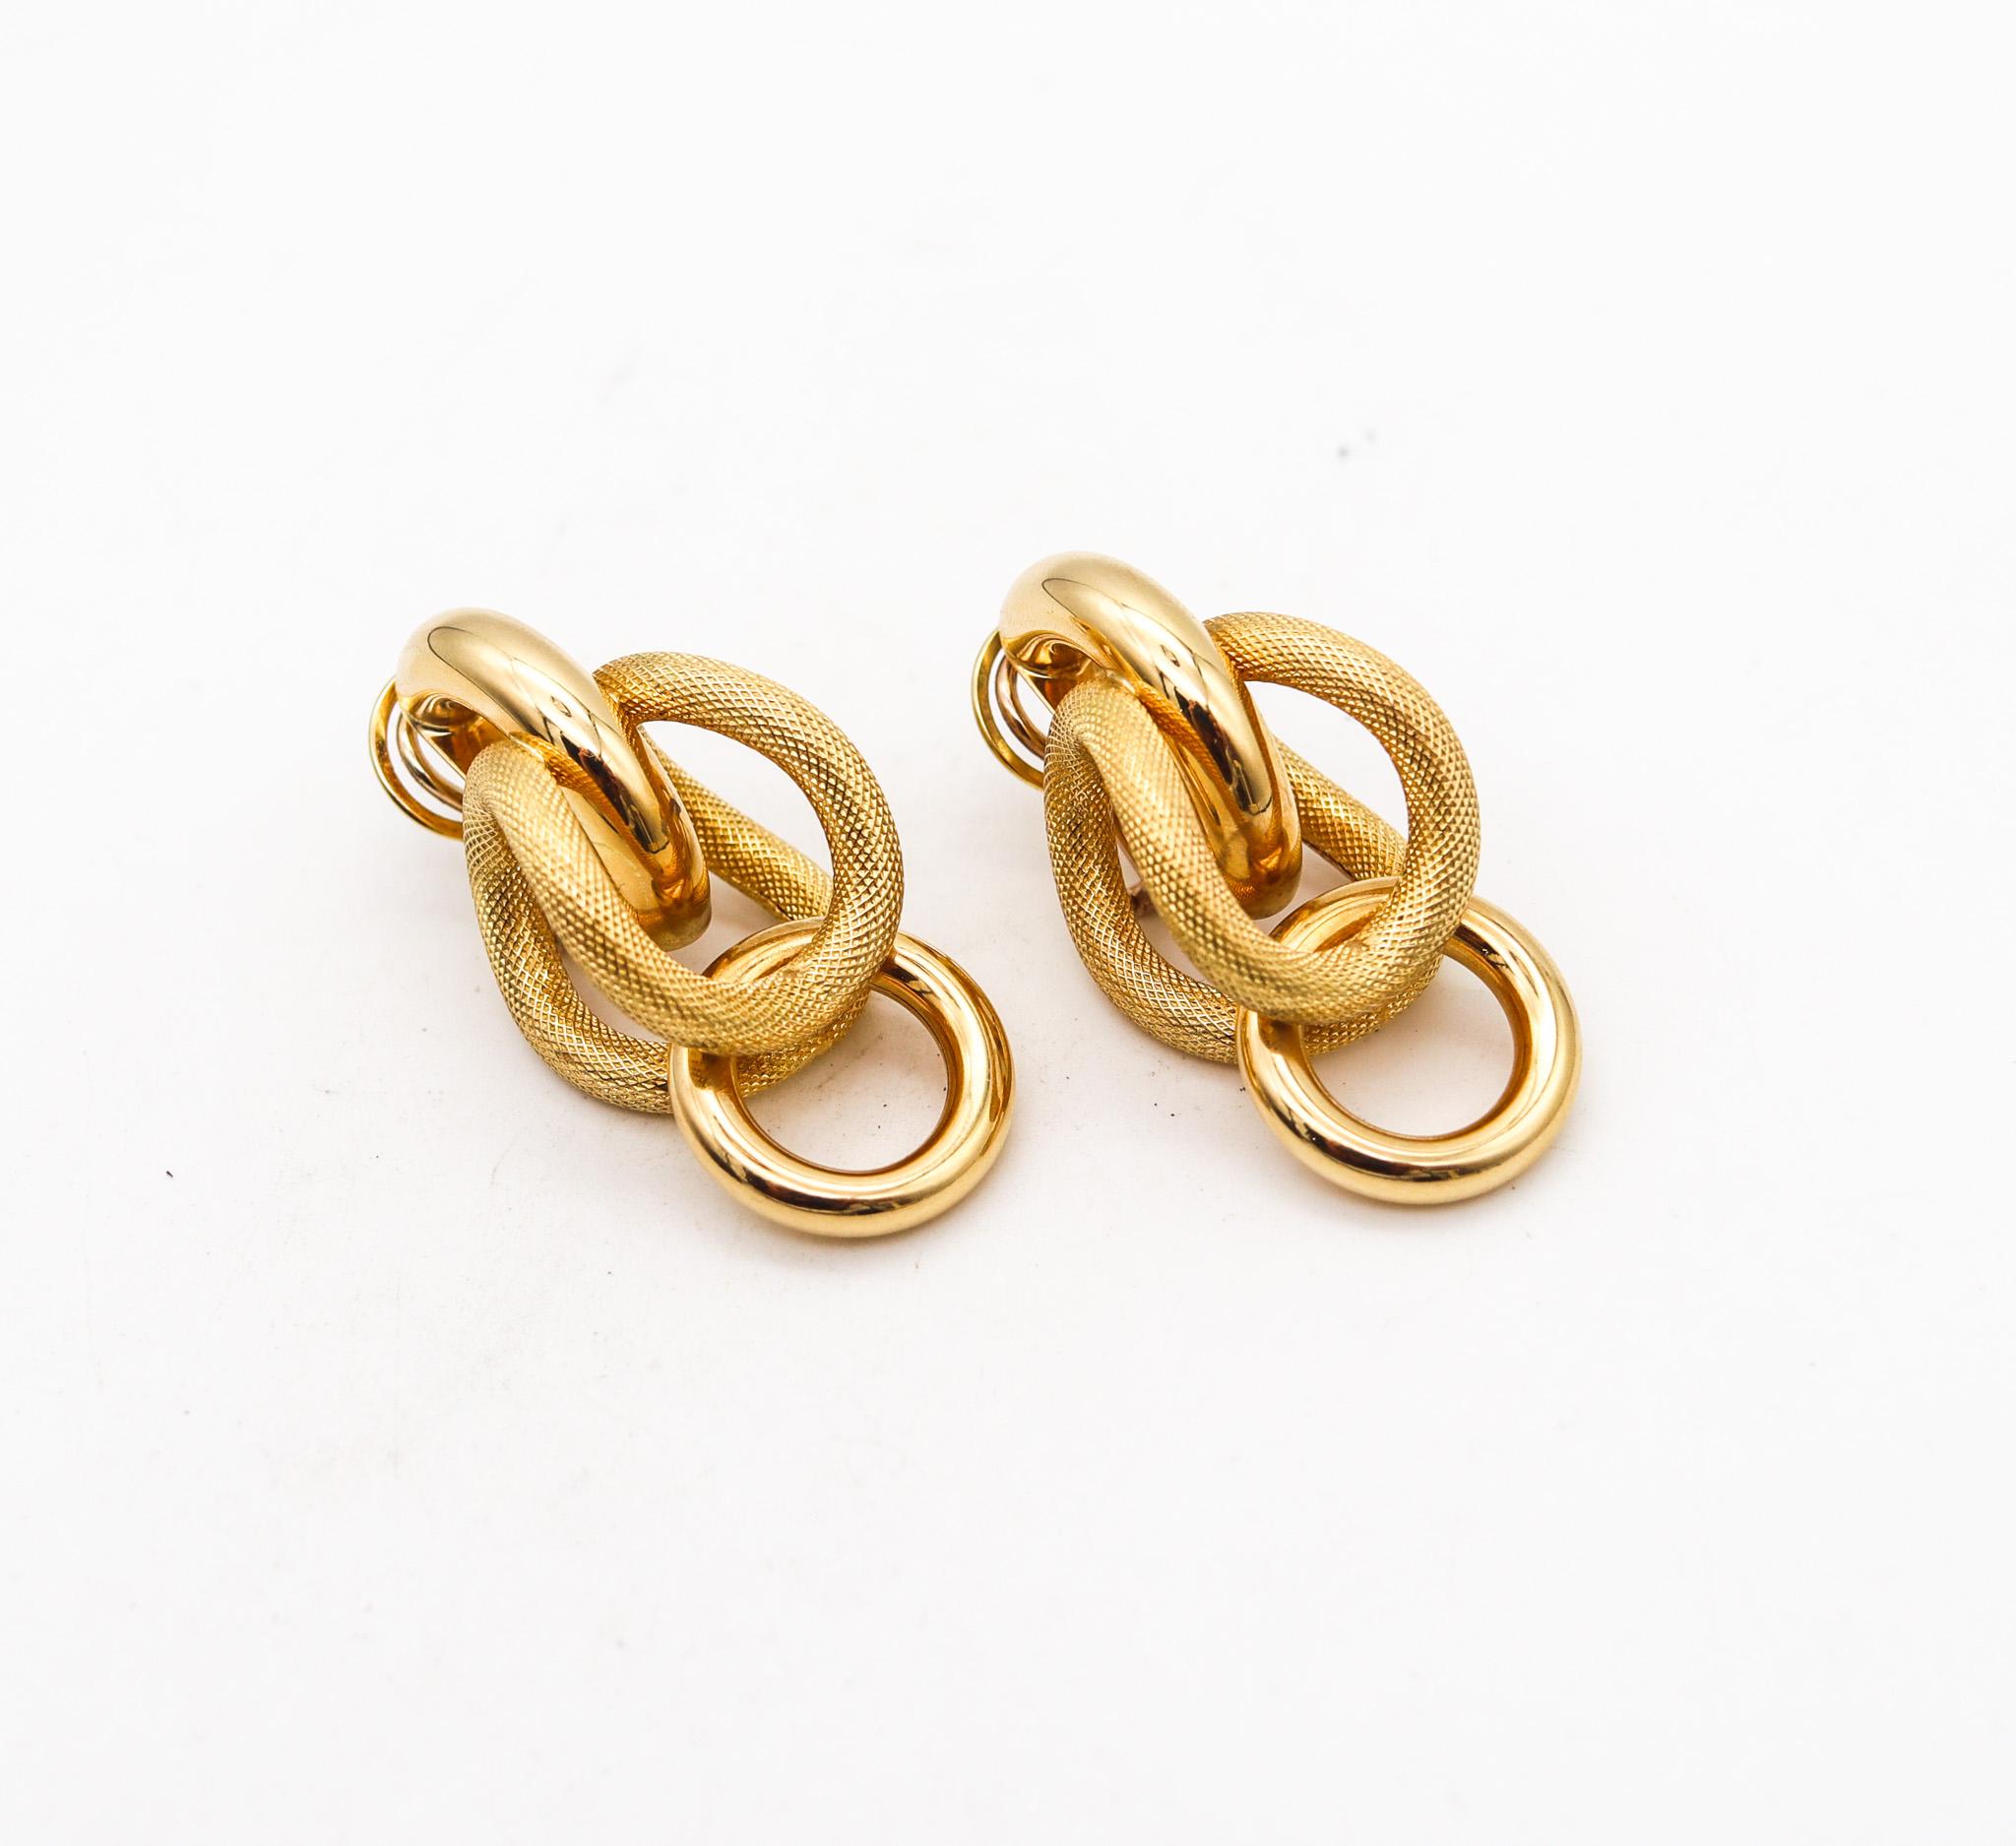 Sculptural earrings designed by Riccardo Marotto.

A statement pair of sculptural earrings, created in Vicenza Italy at the jewelry atelier of Riccardo Marotto, back in the late 20th century. These pair were made up with multiples curved tubular